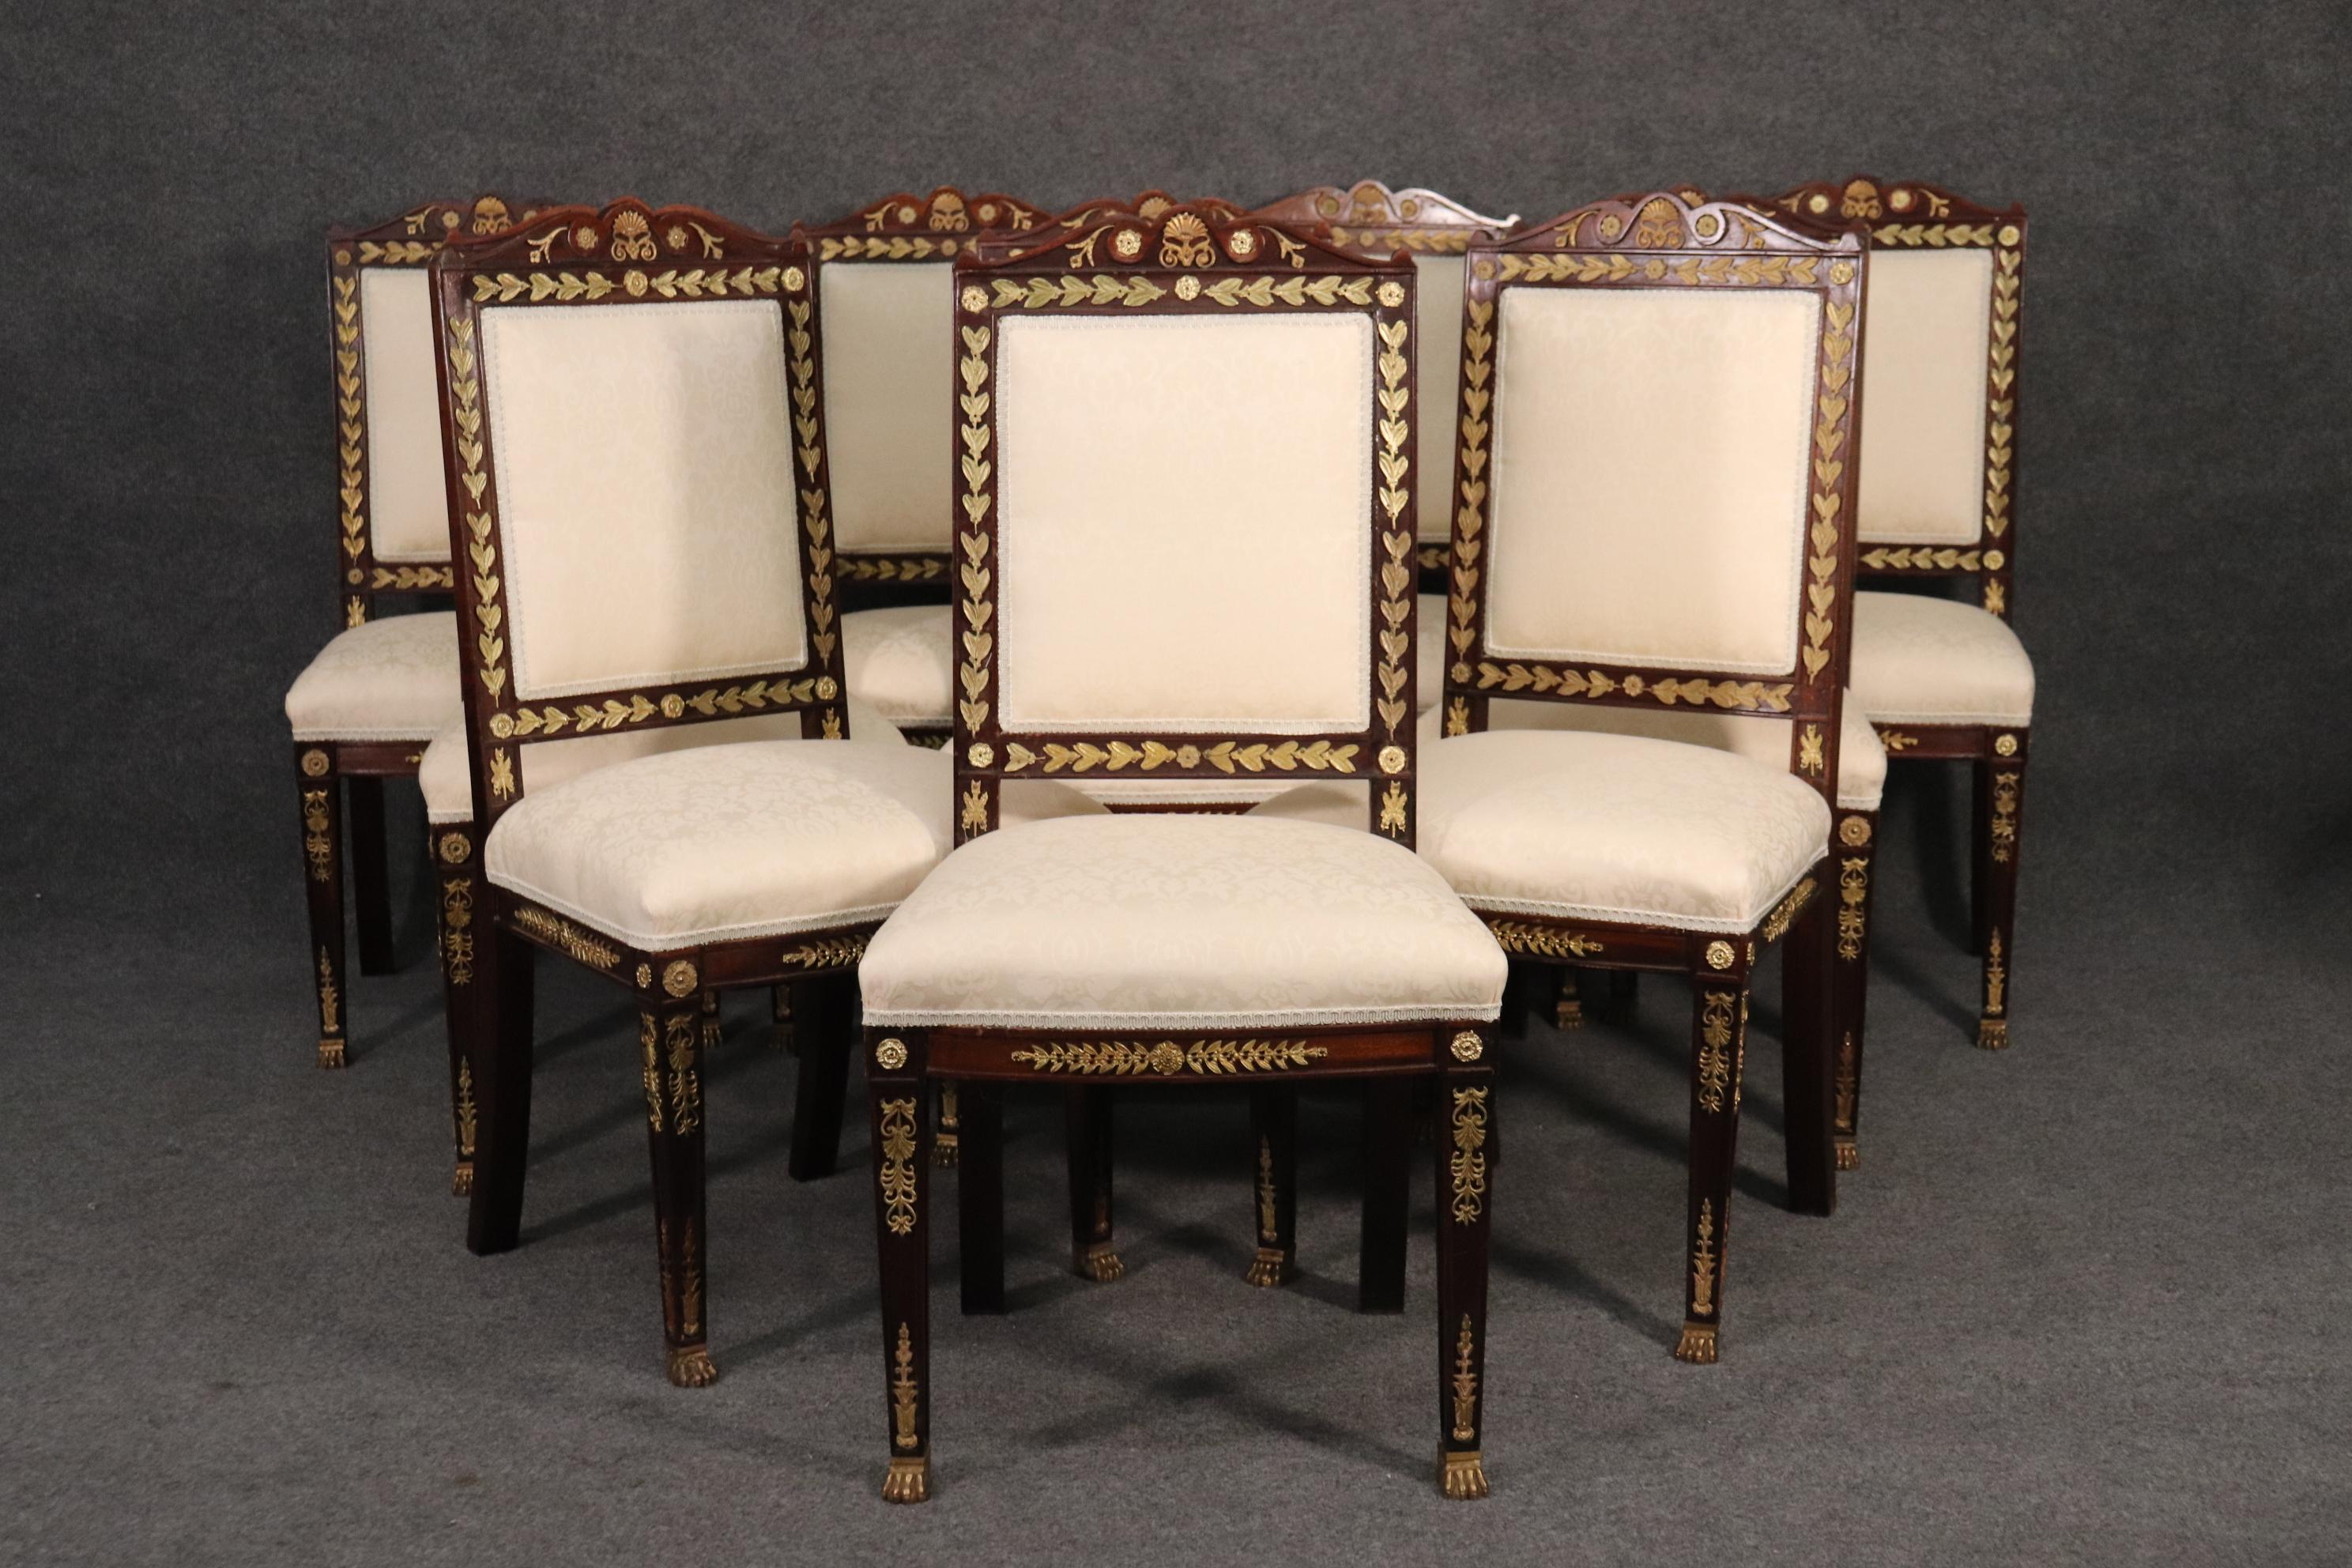 This is a beautiful set of 10 bronze mounted walnut French Empire dining chairs. The chairs have bright bronze in gold and a beautiful contrasting dark walnut frame. The frames are adorned with bronze ormolu and feet. The chairs each measure 40 tall